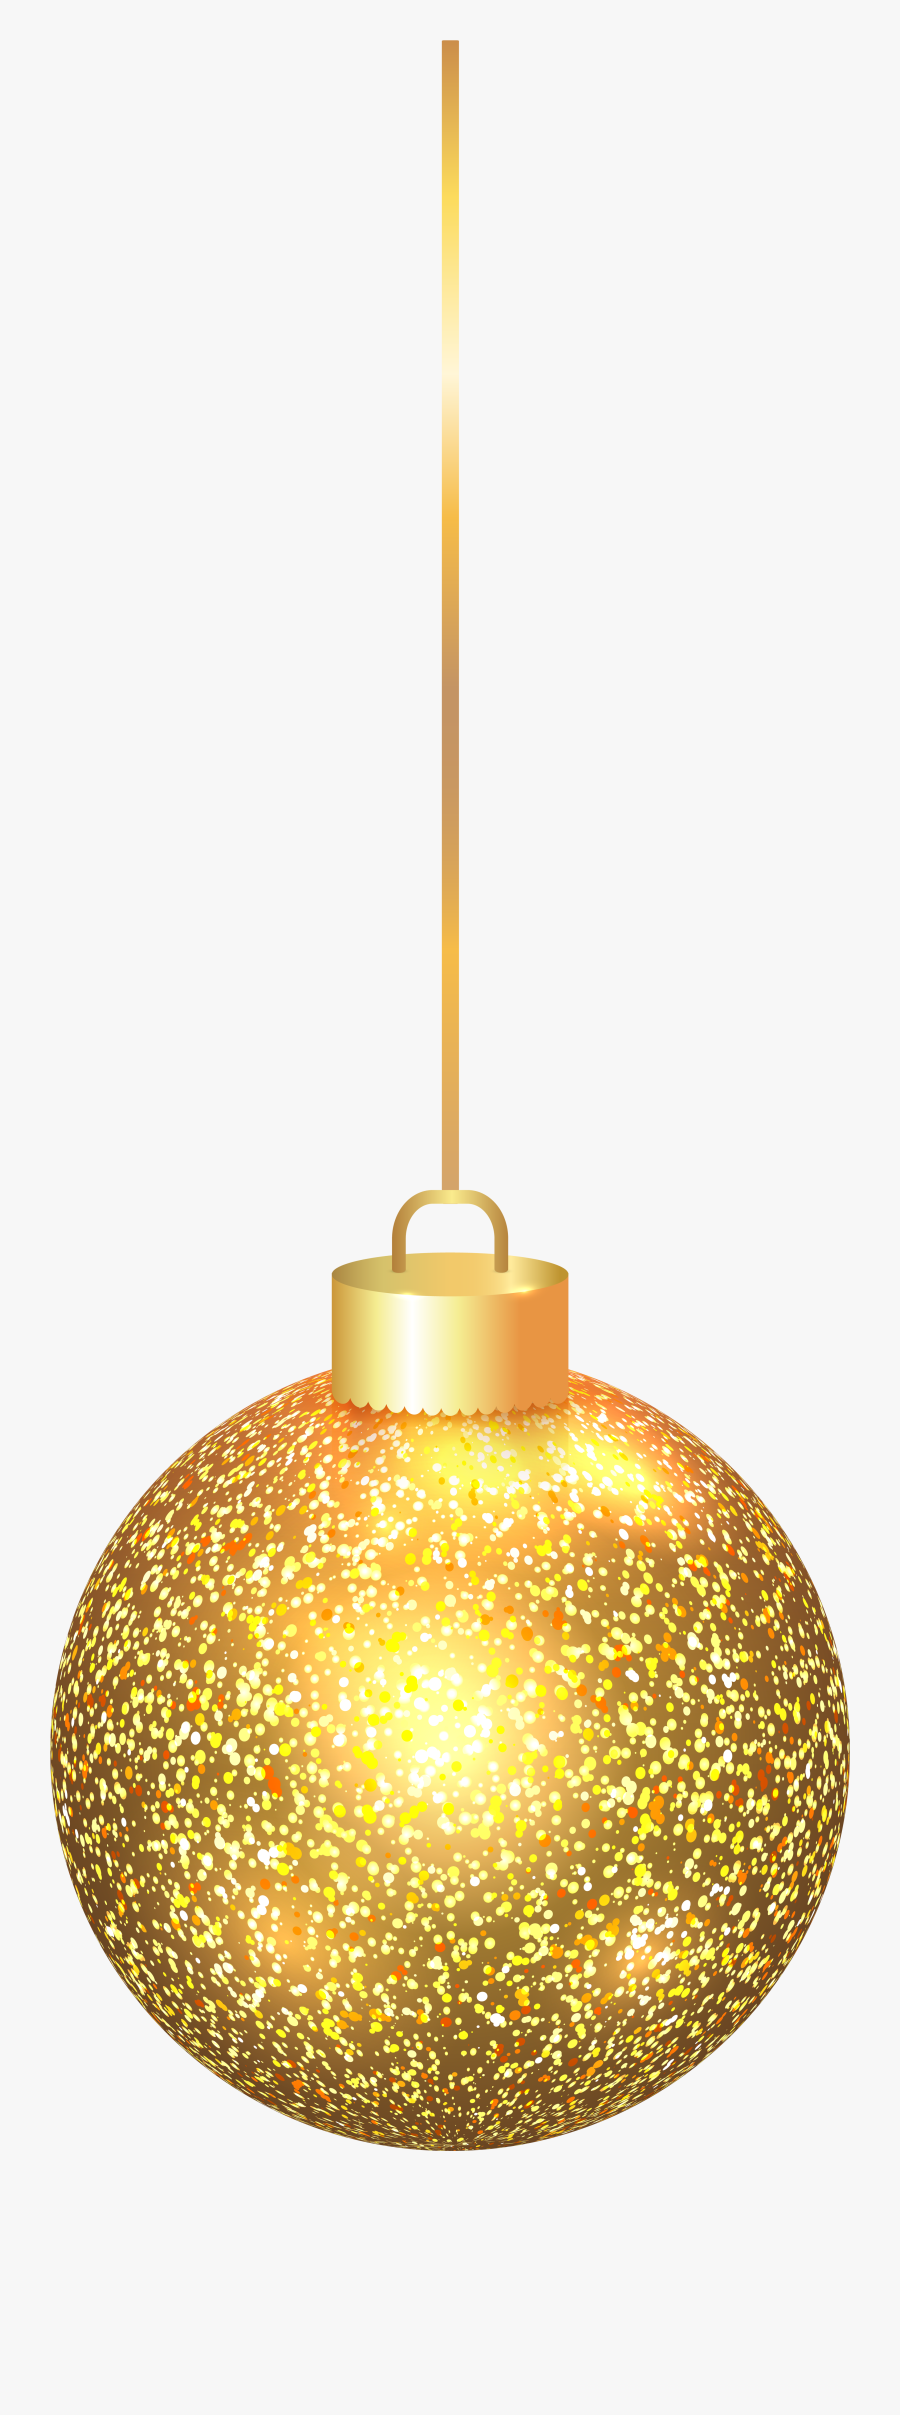 Clipart Christmas Elegant Gold - Christmas Gold Ball Png, Transparent Clipart